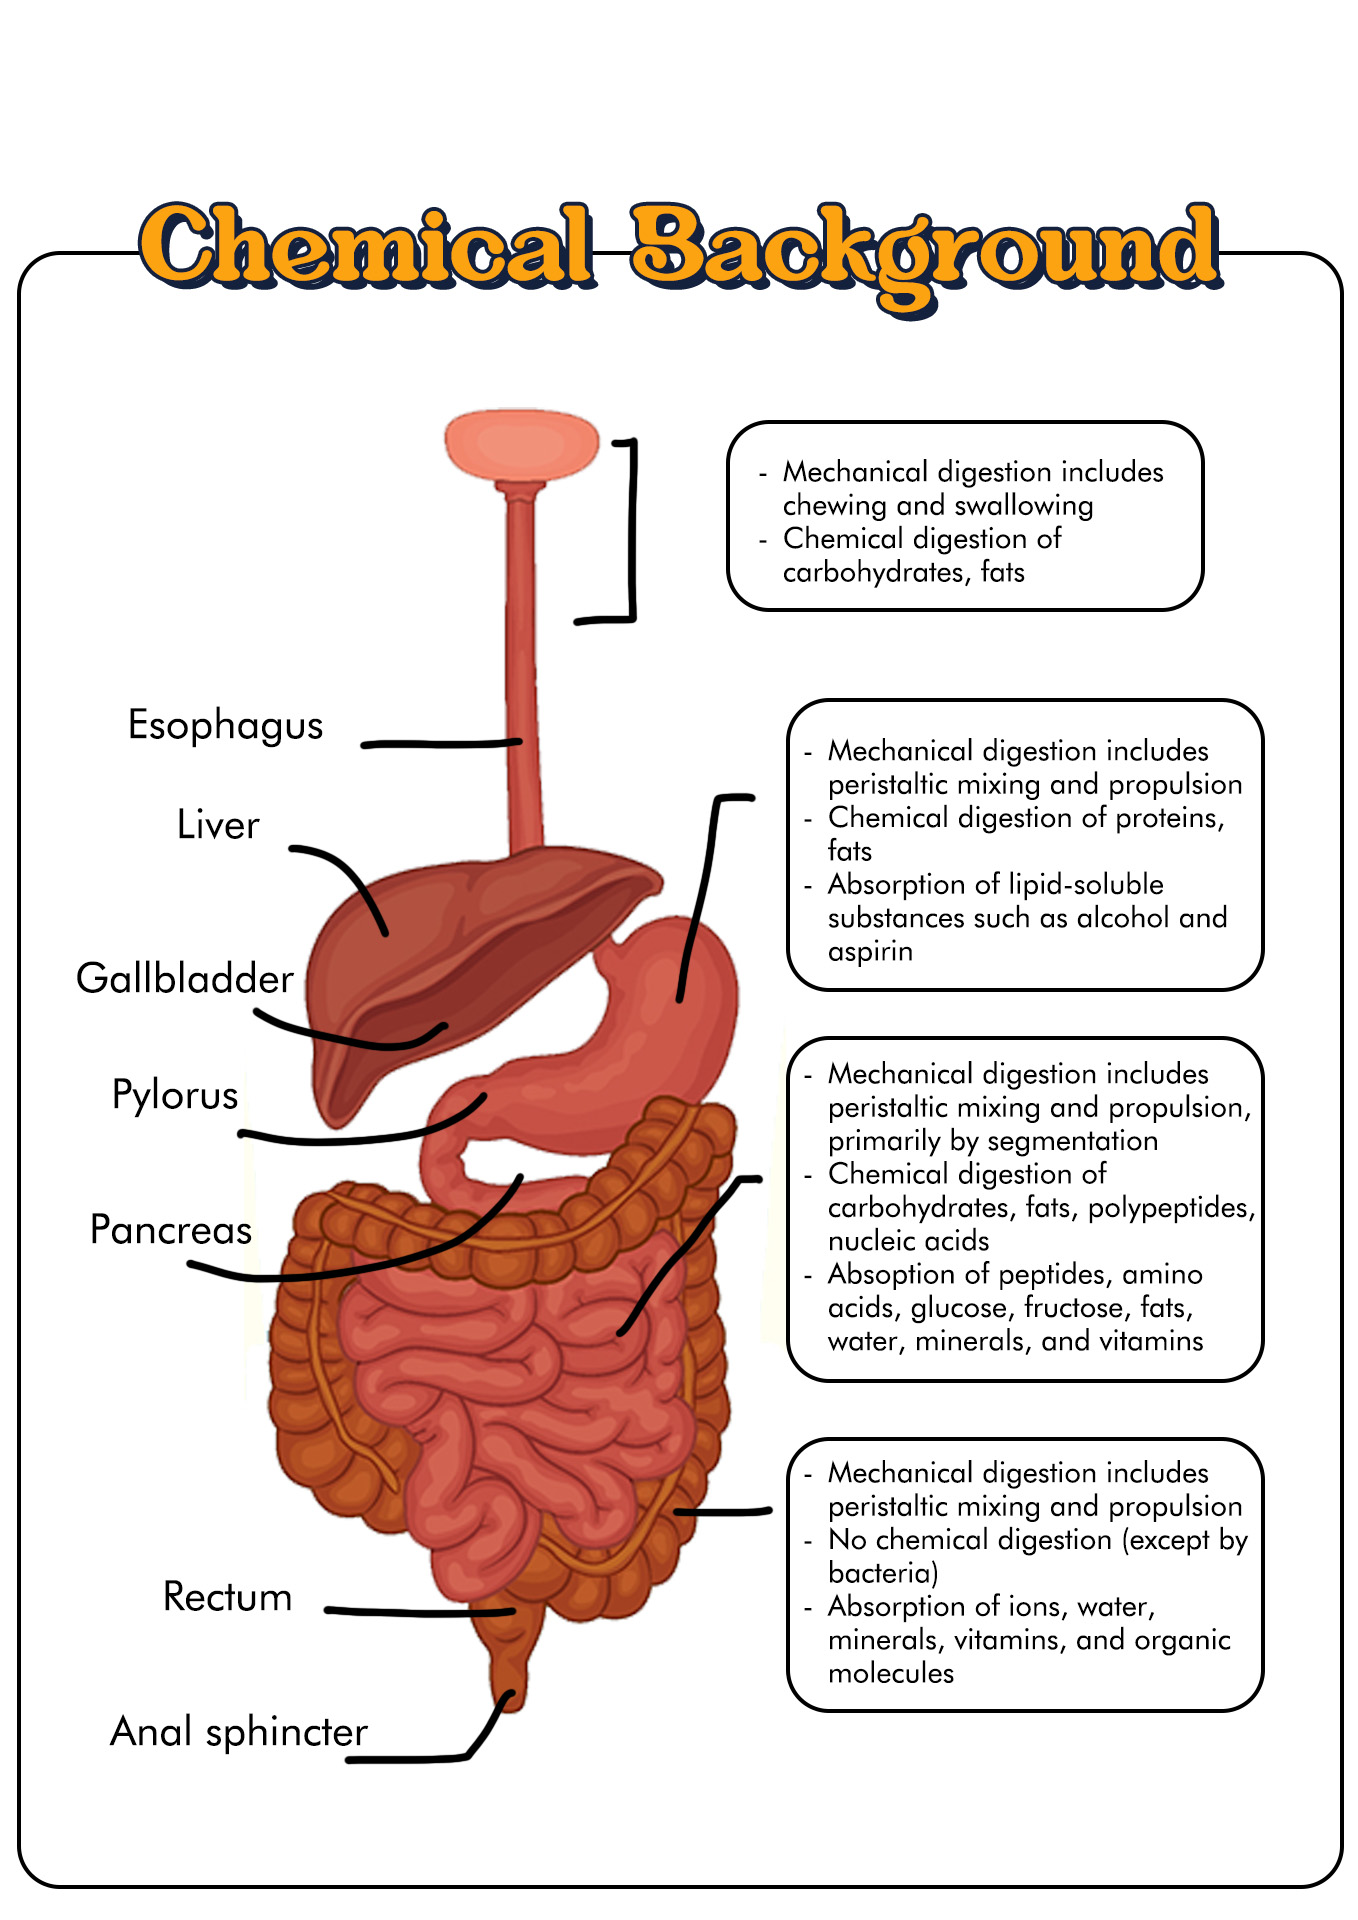 Chemical Breakdown in Digestive System Image